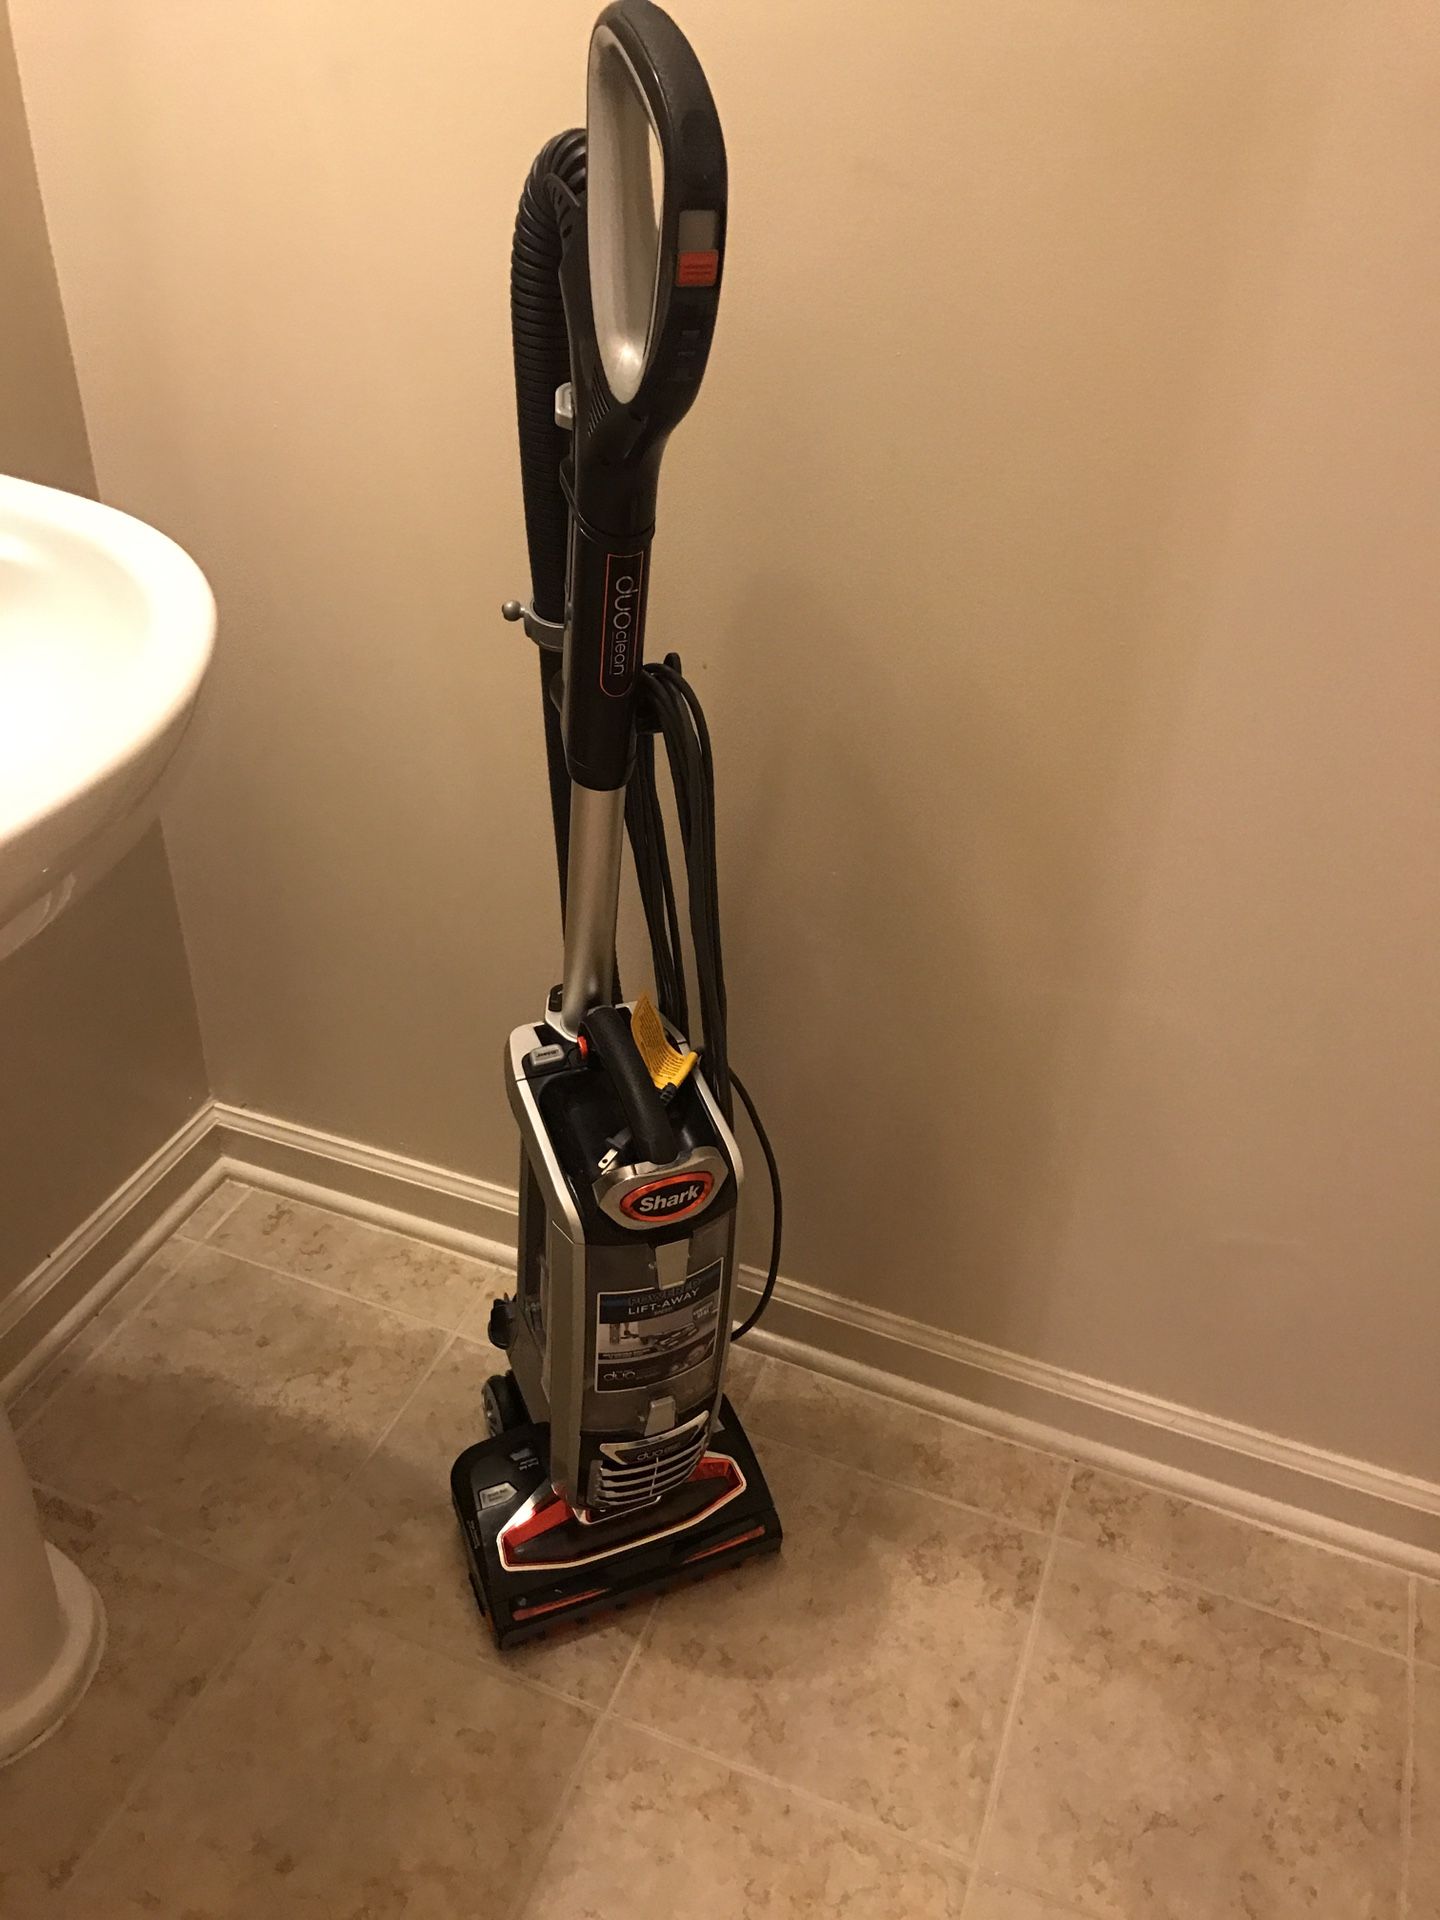 Shark DuoClean Powered Lift-away Speed Vacuum Used with Perfect condition